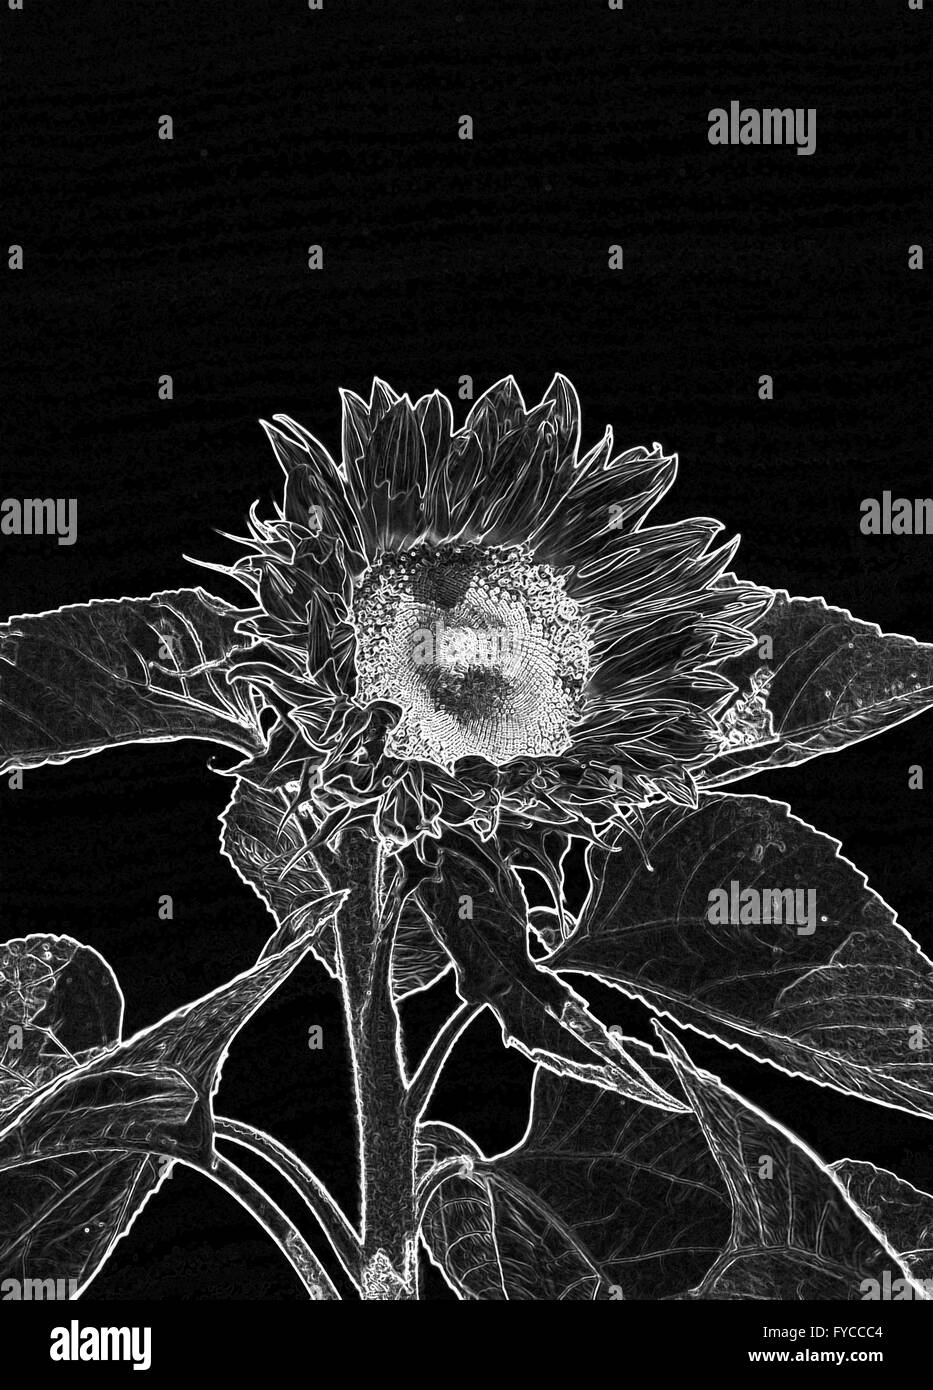 Photo of a sunflower digitally manipulated to look like a white line sketch on black background see also FYT155 Stock Photo